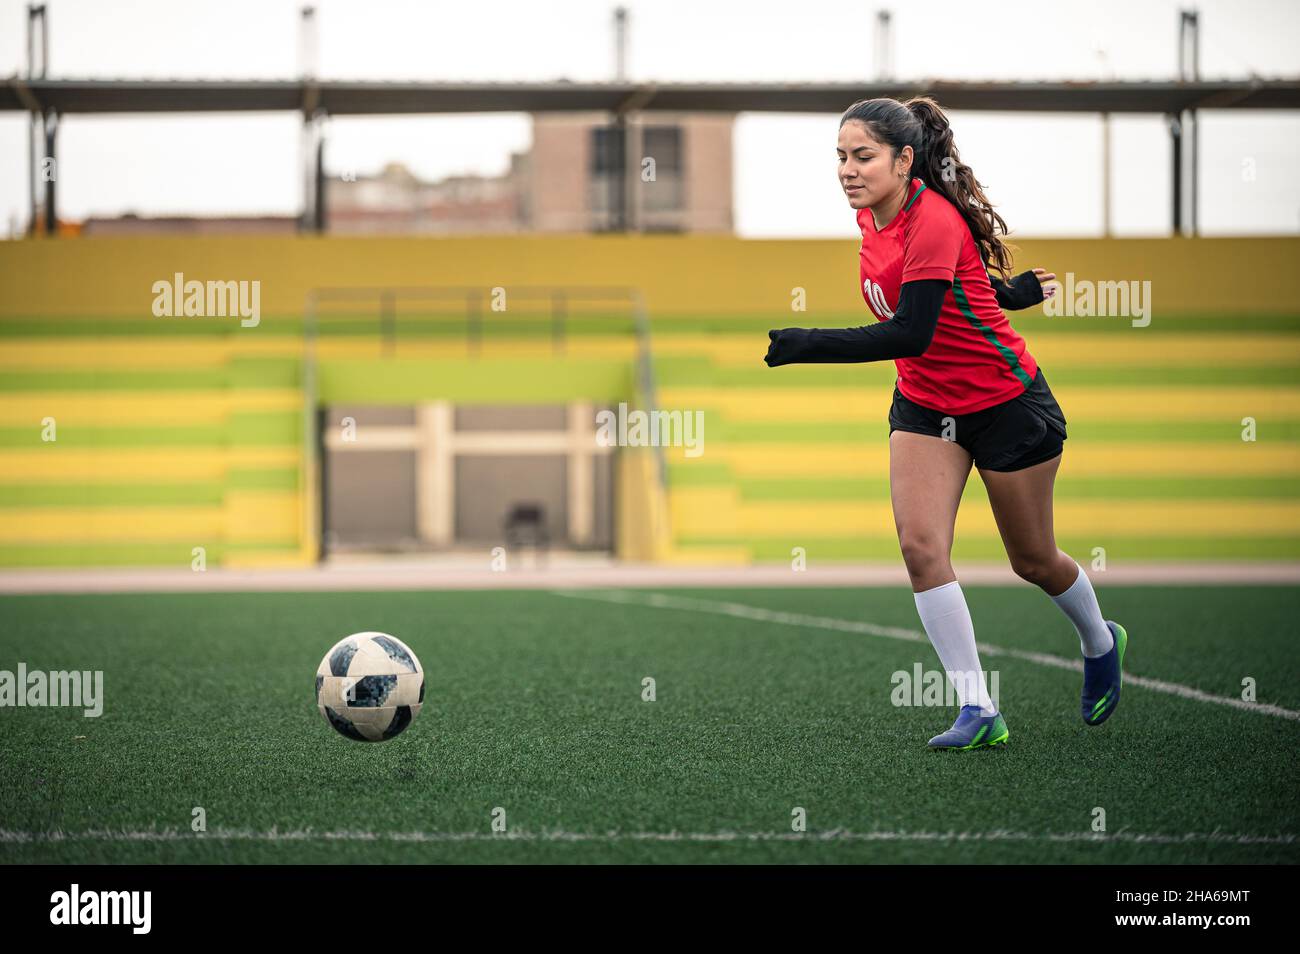 young female soccer player kicks the ball on the field Stock Photo